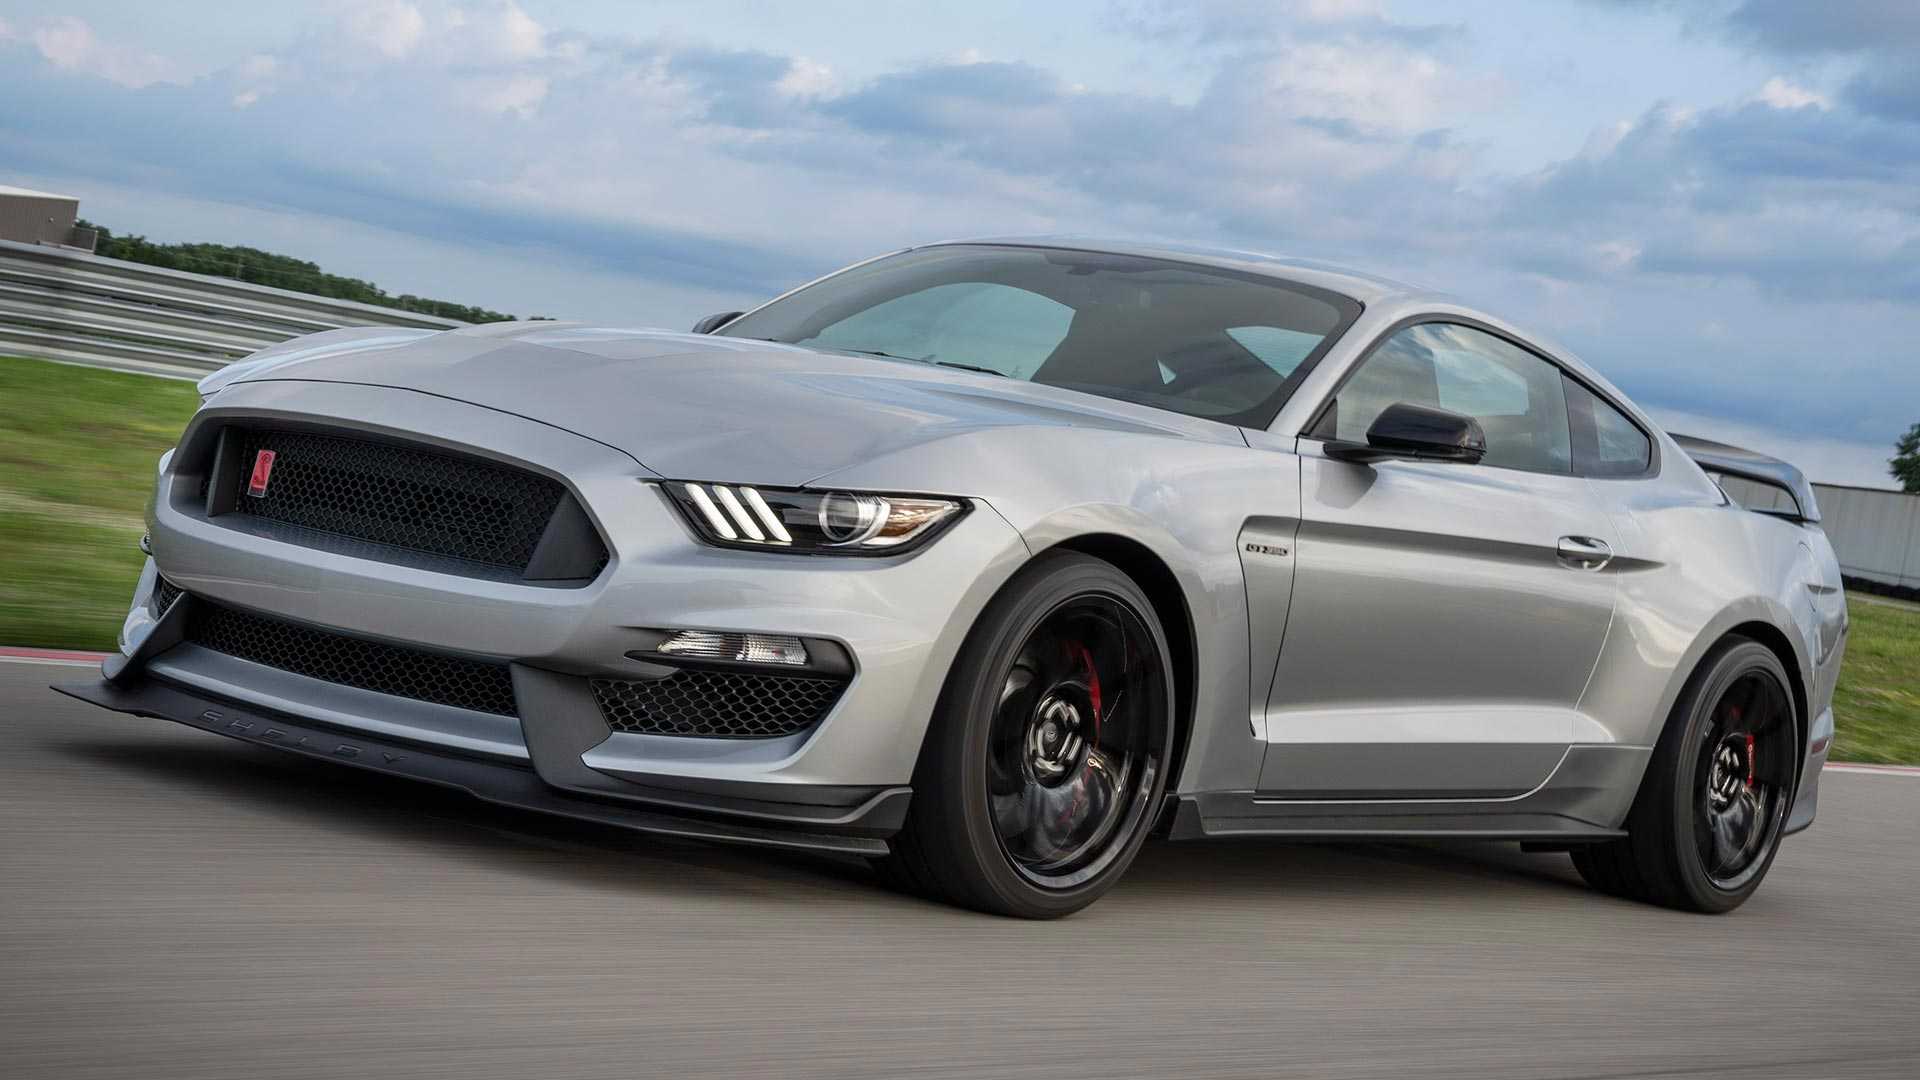 Ford Mustang Shelby GT350R Debuts With GT500 Parts, New Colors